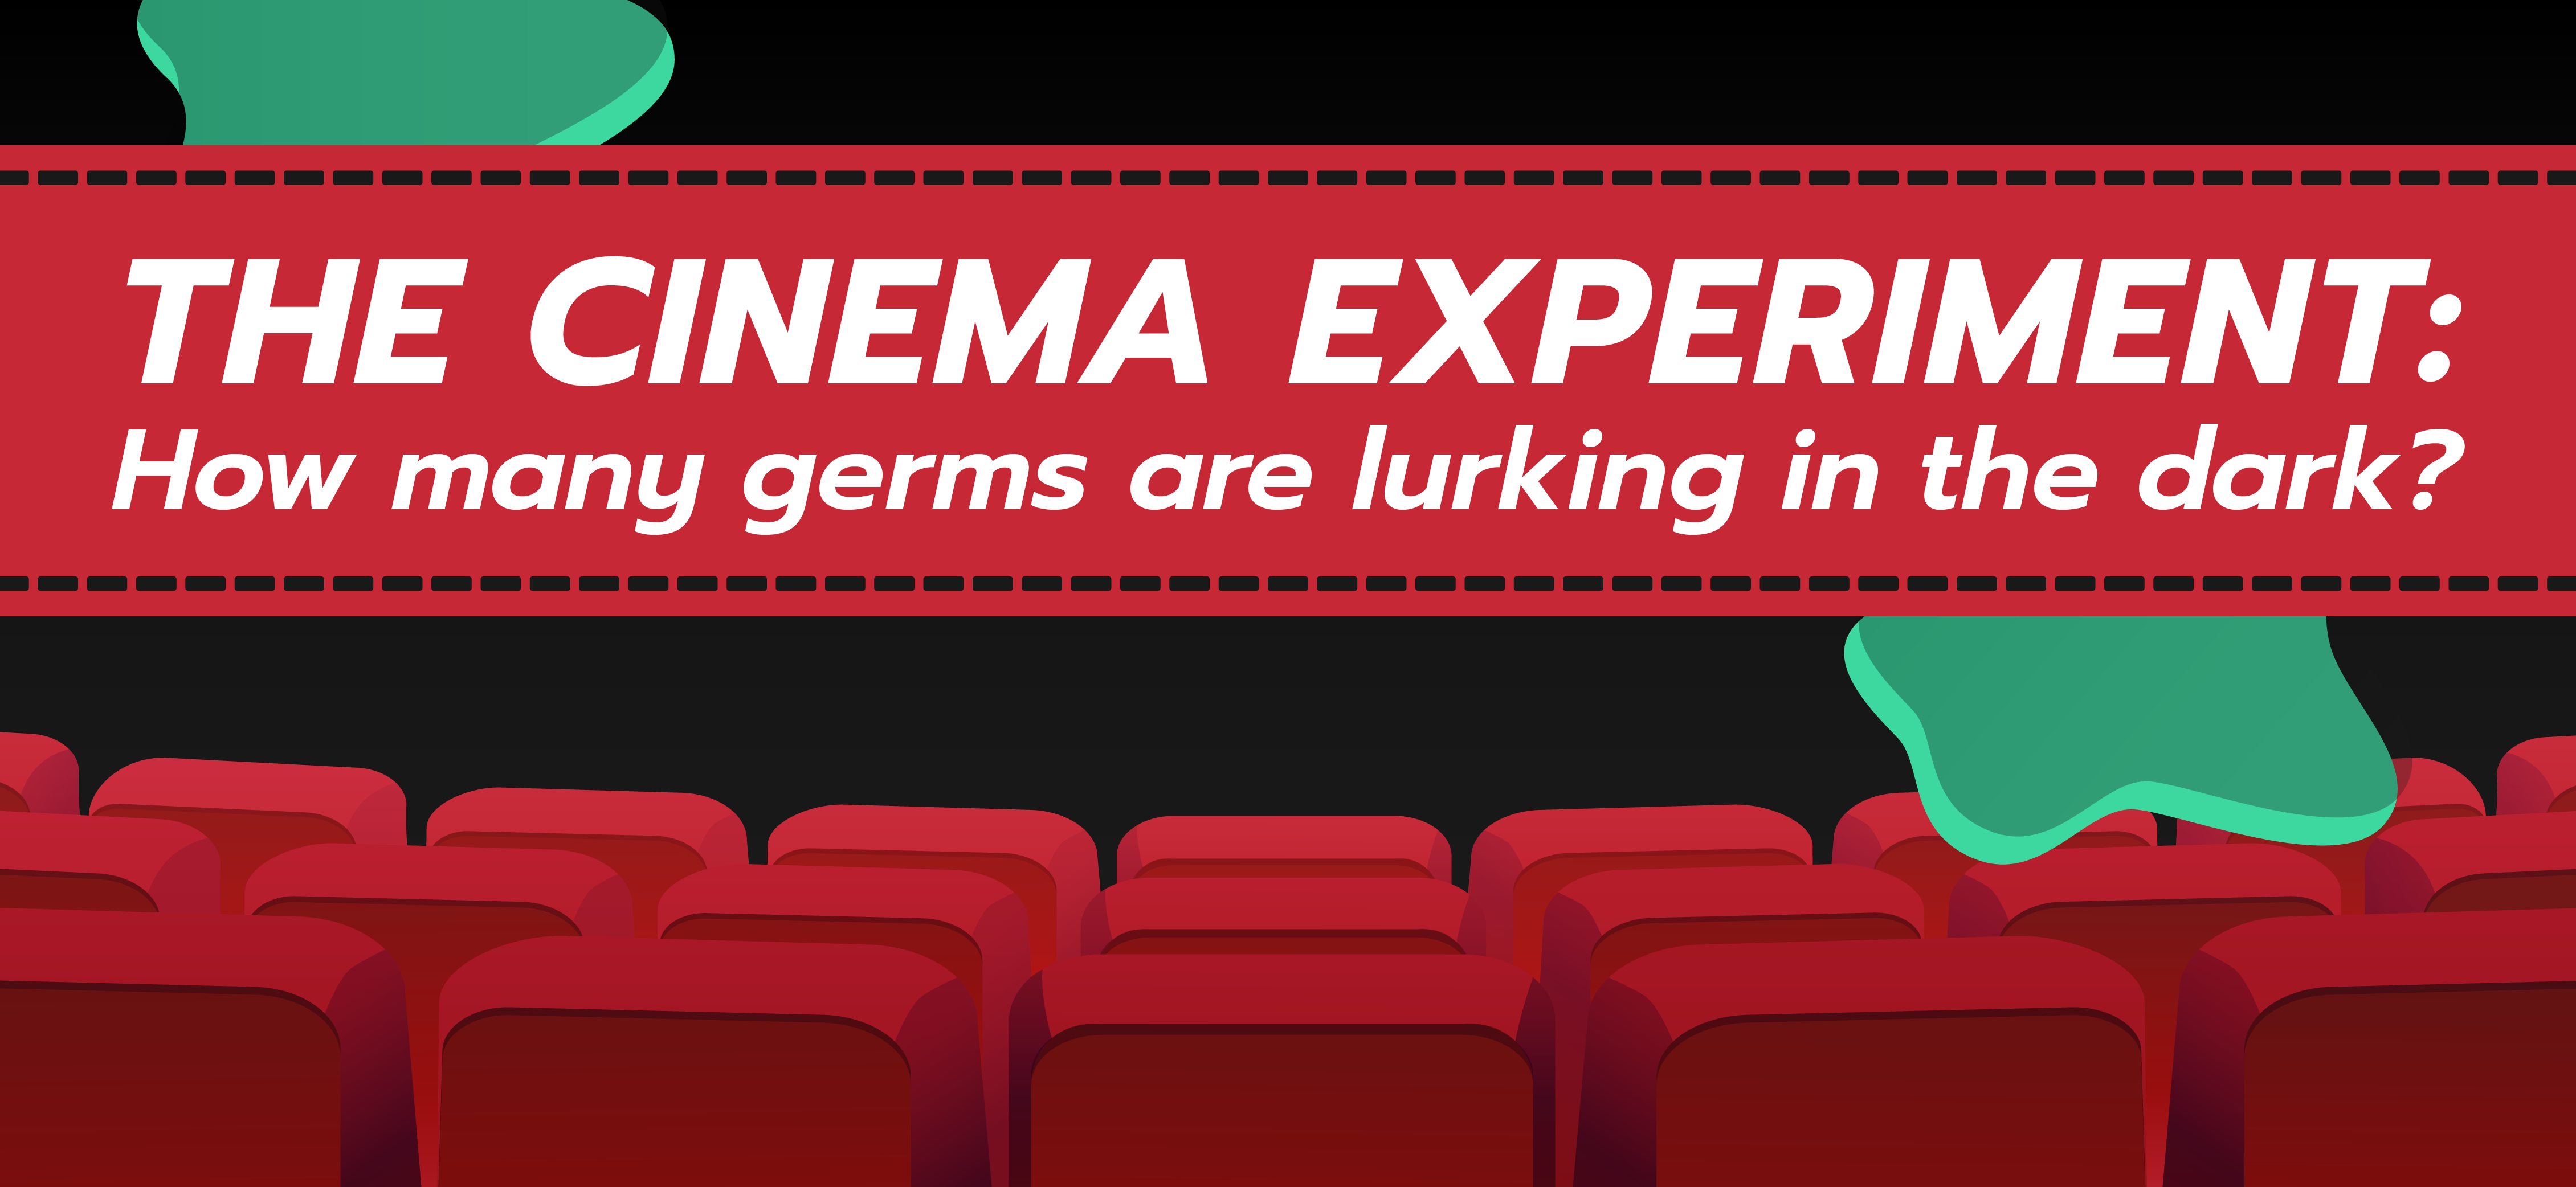 How many germs are lurking at the cinema?